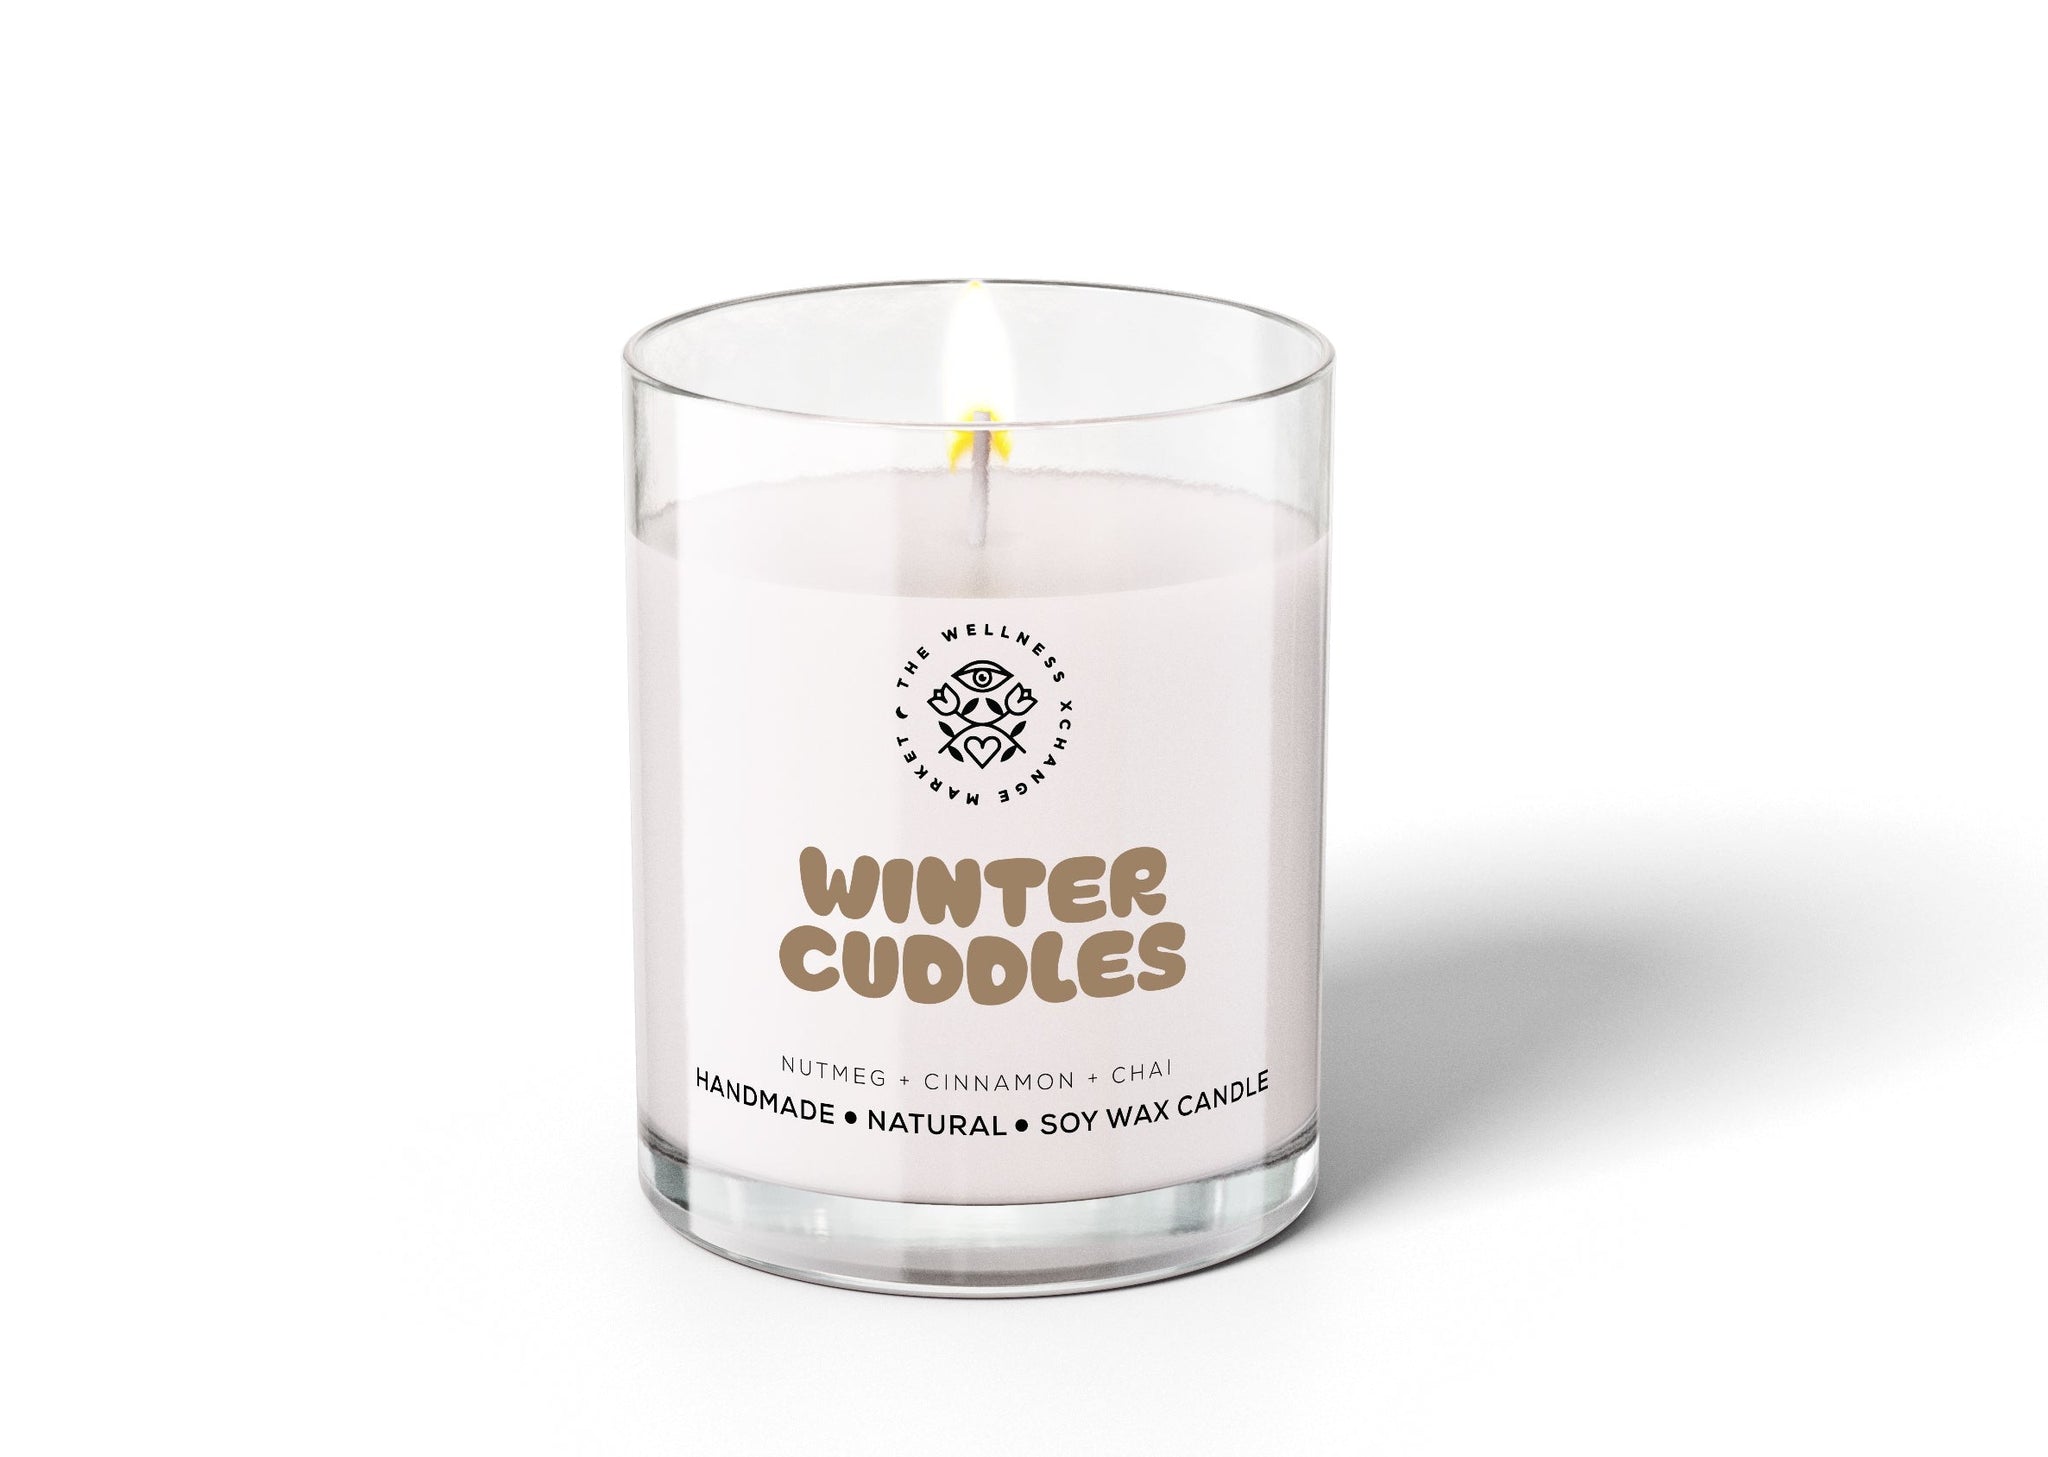 Winter Cuddles Soy Wax Candle